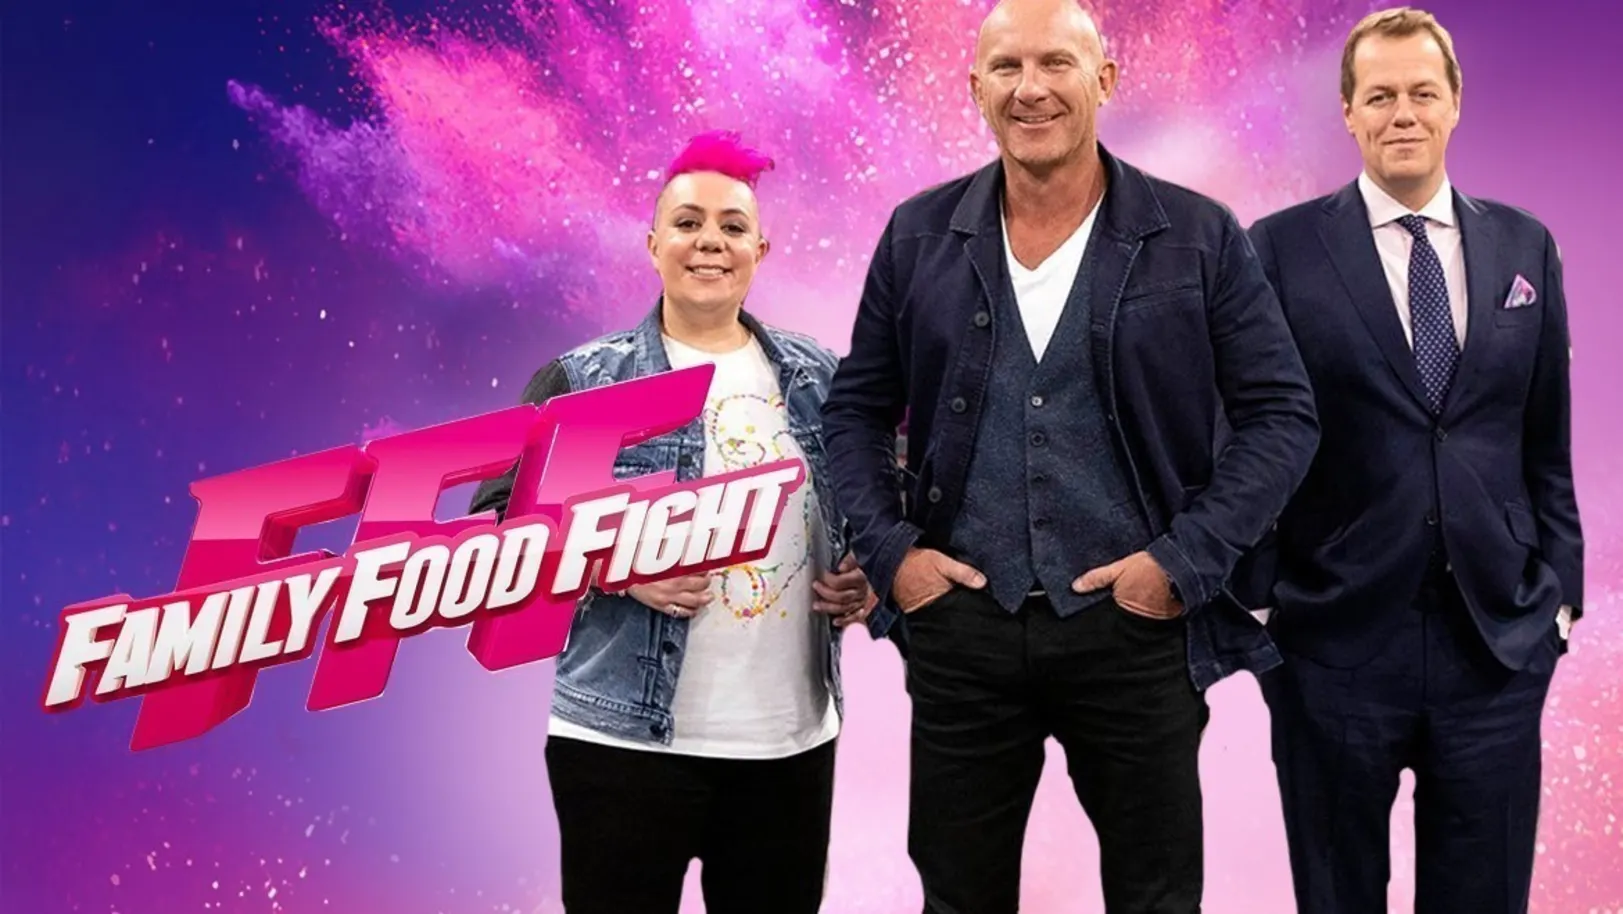 Family Food Fight TV Show